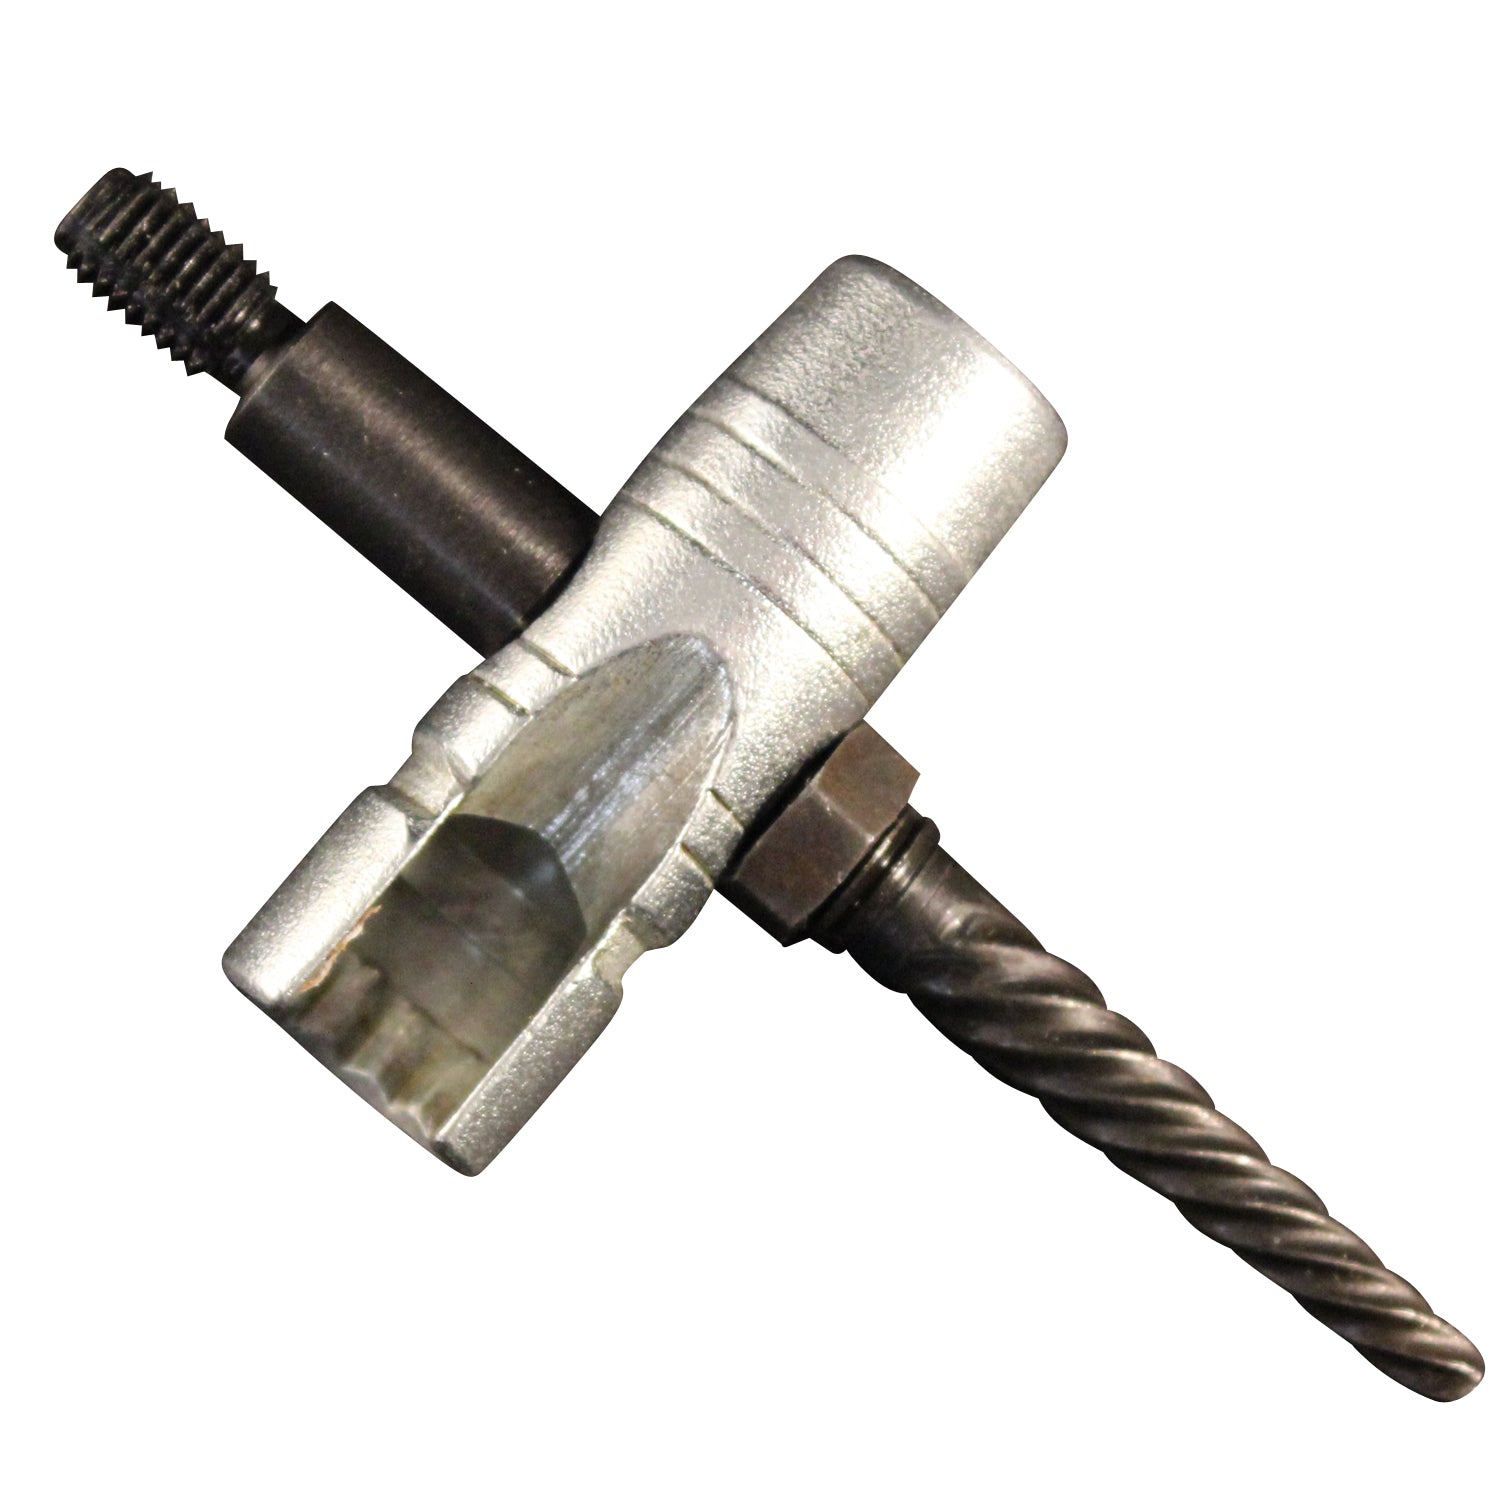 Small Easy Out Grease Fitting Tool (Single Retail Pack)